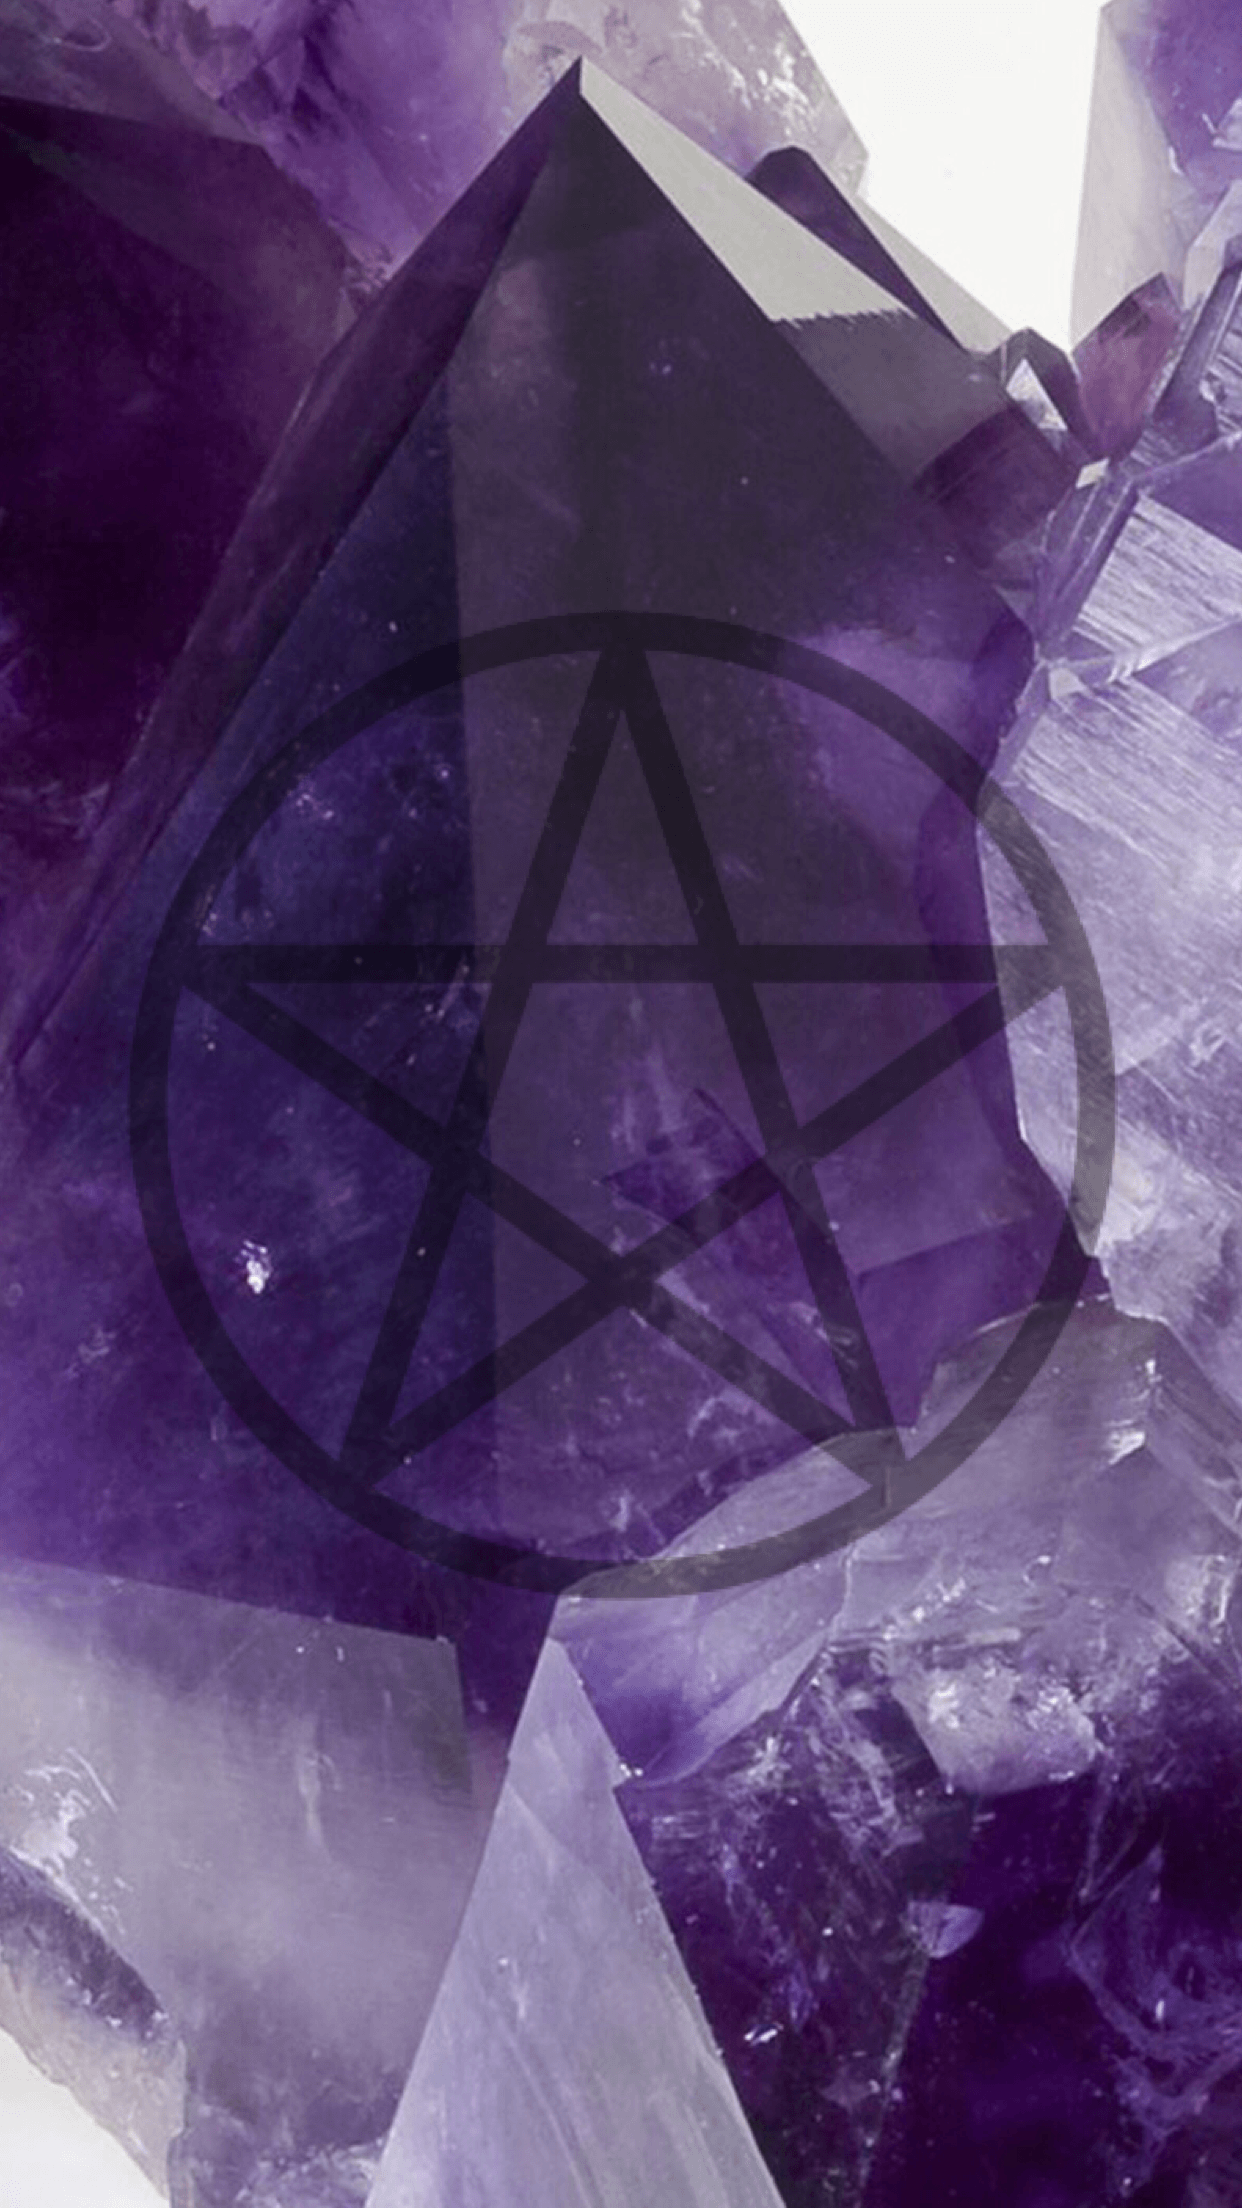 Witch Aesthetic Wallpapers on WallpaperDog